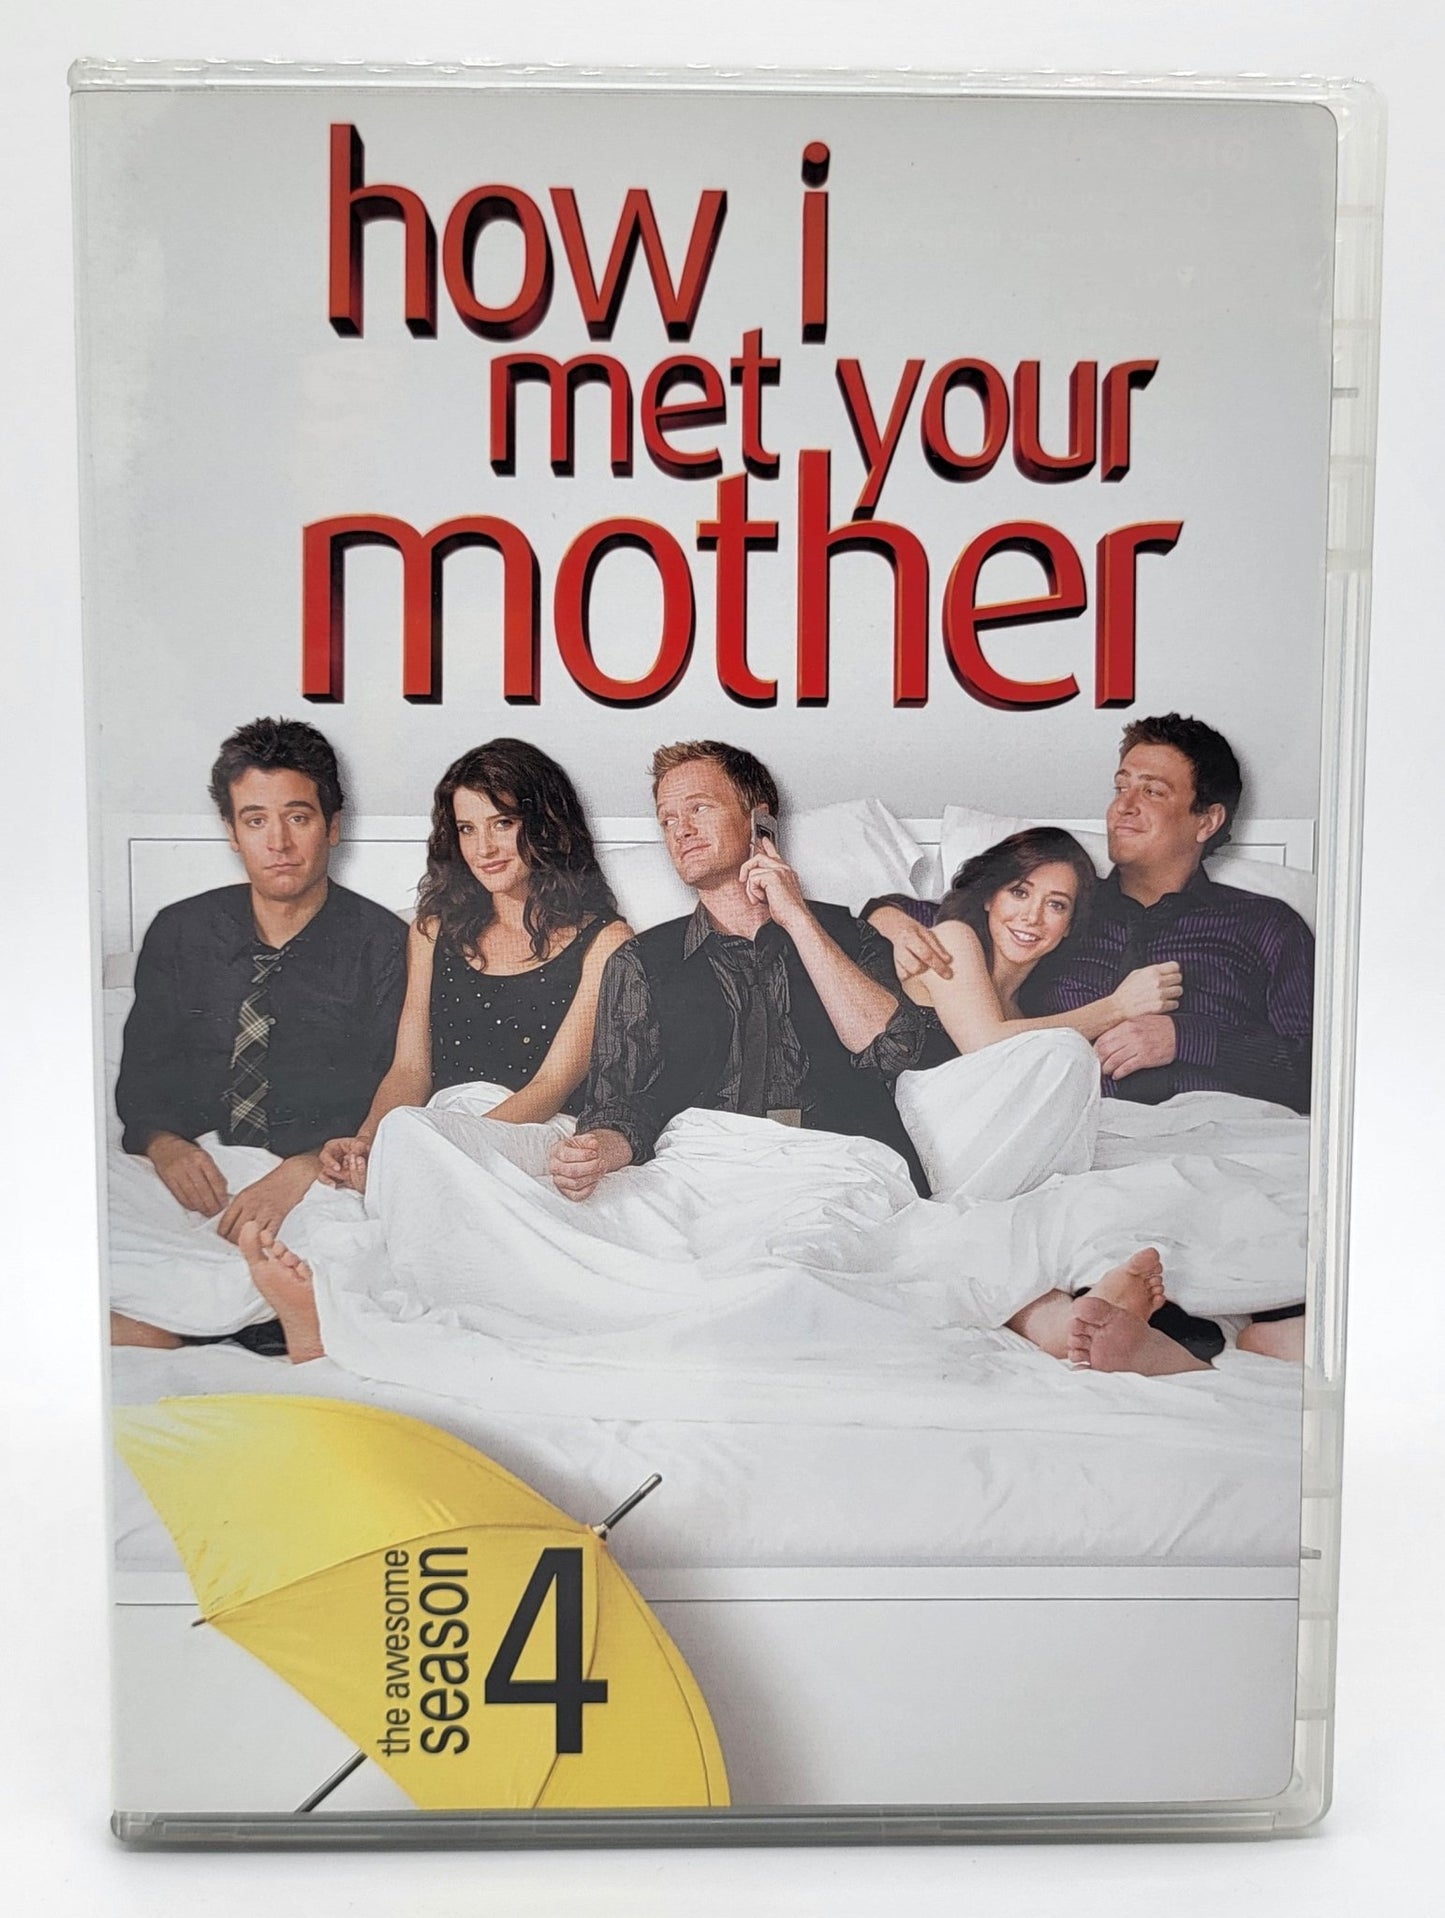 20th Century Fox Home Entertainment - How I met your mother | DVD | The Complete Season 4 - DVD - Steady Bunny Shop